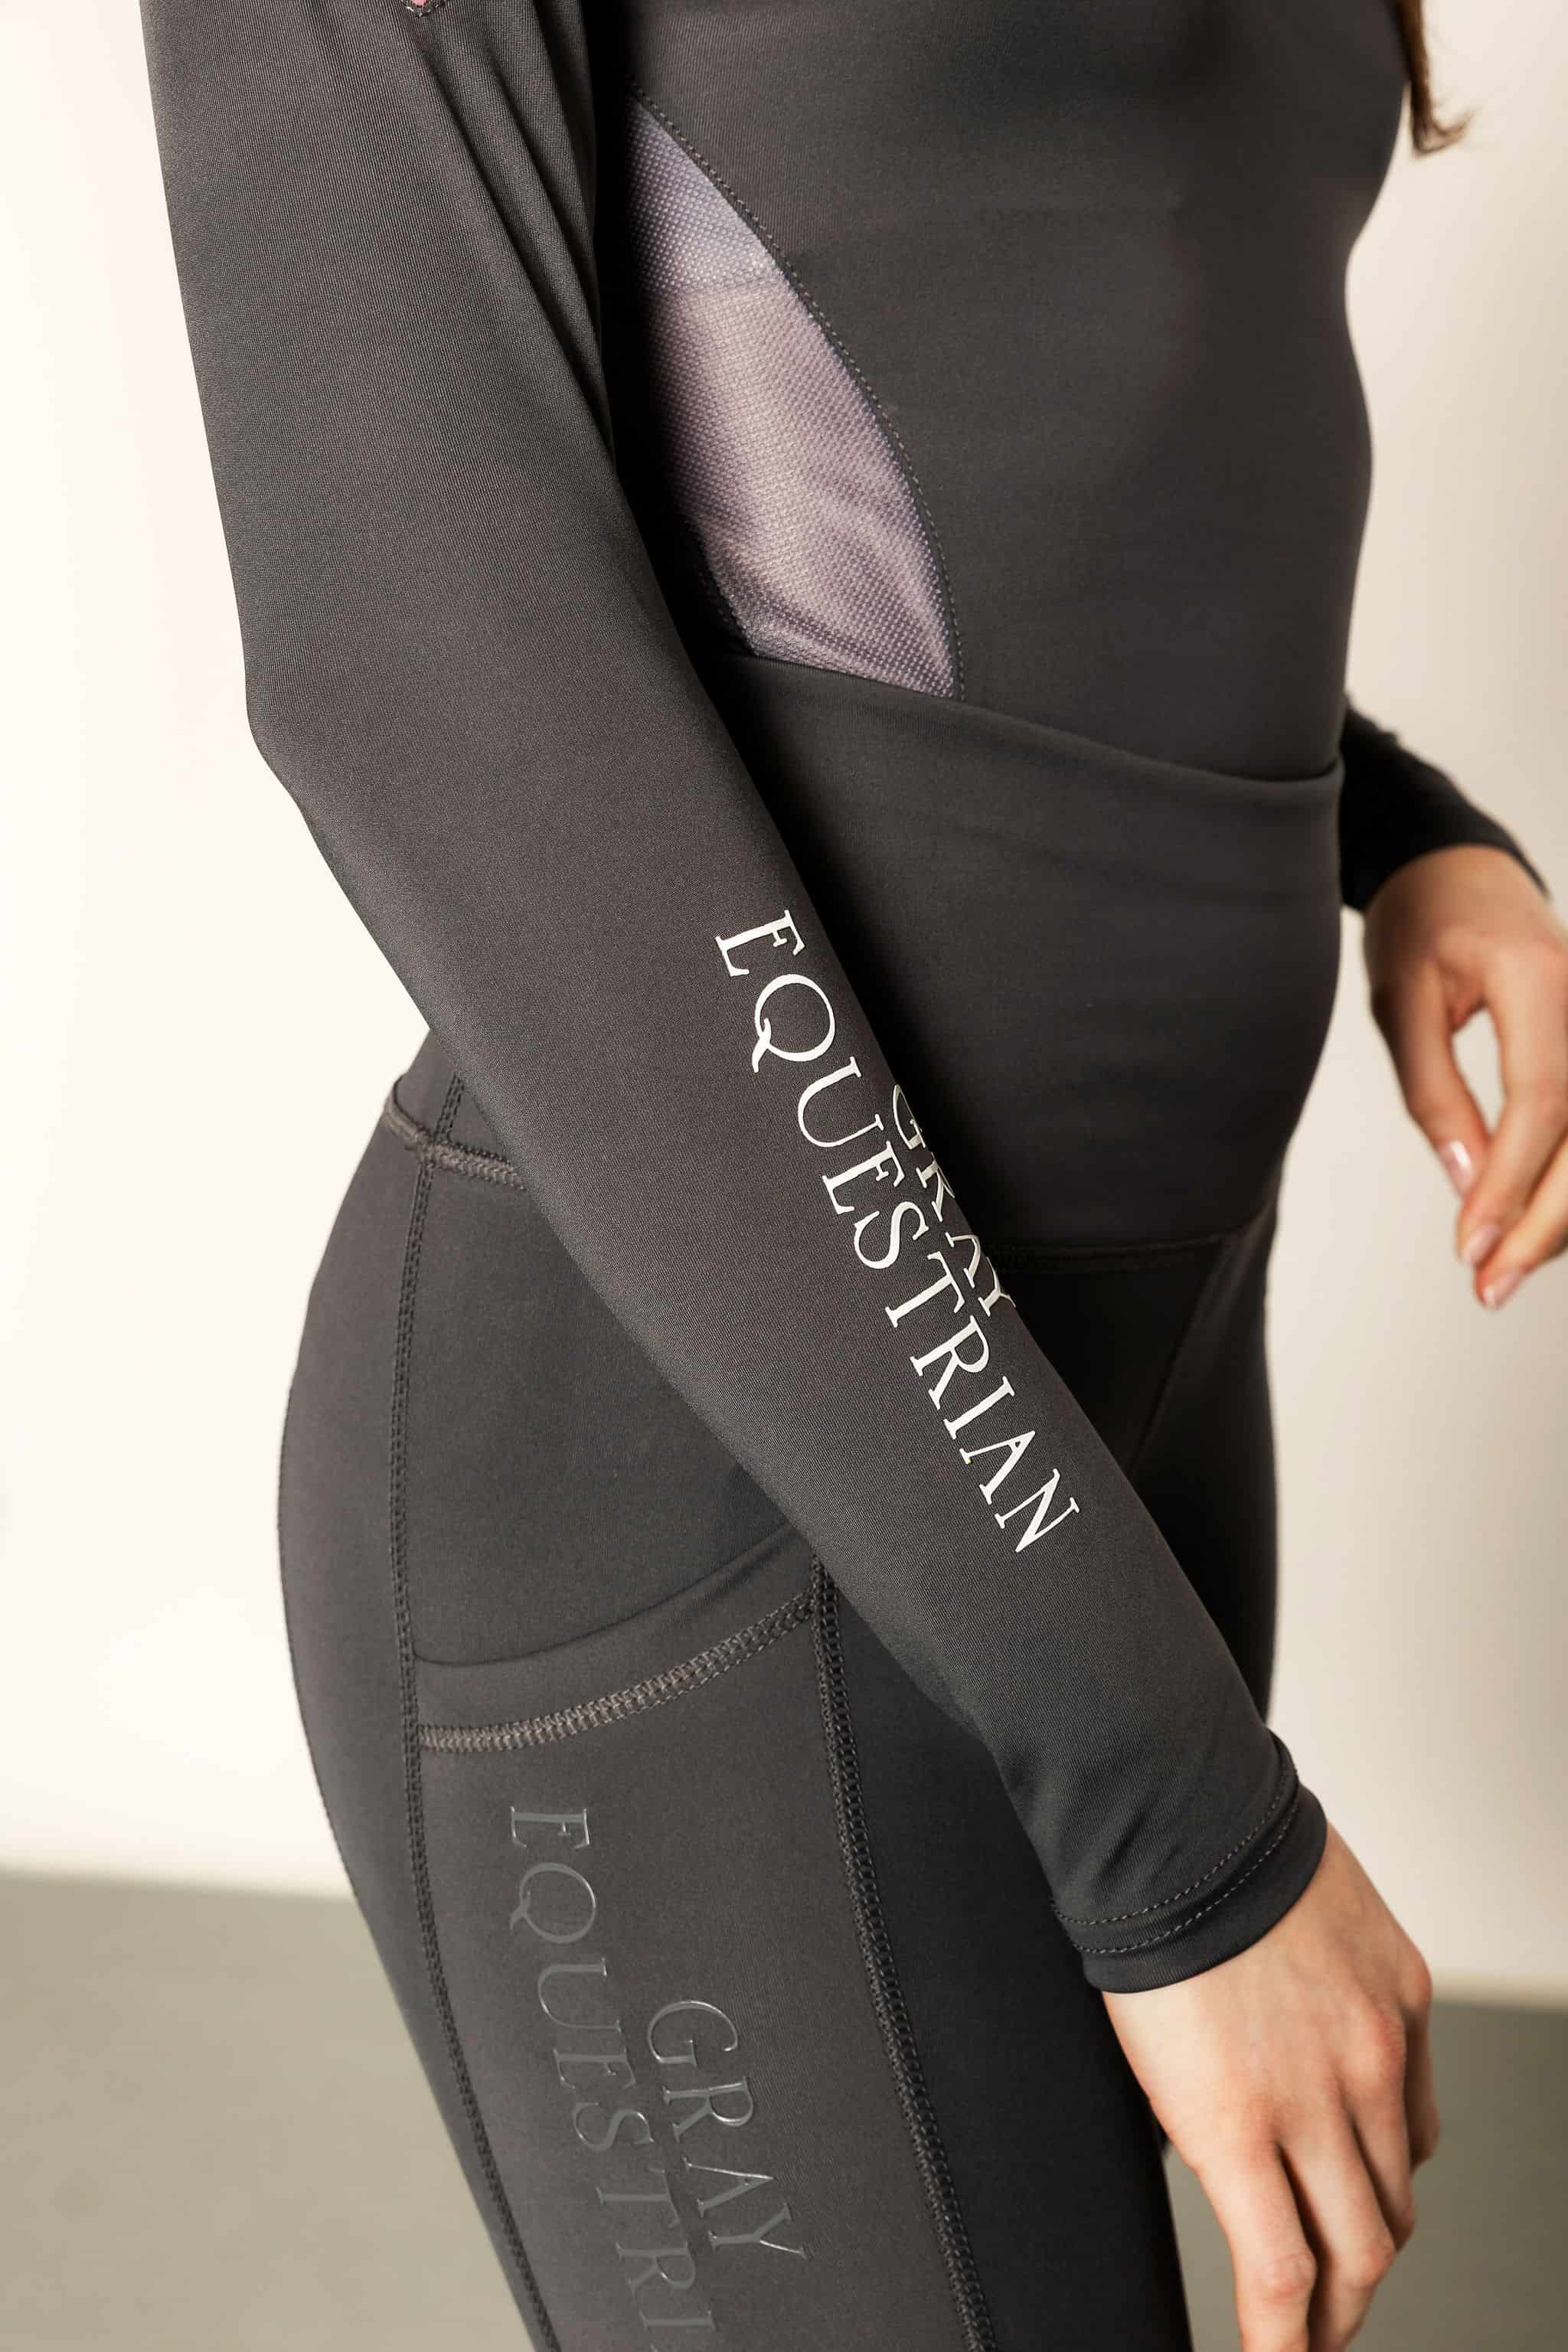 Model wearing charcoal grey riding leggings with pink and grey base layer top with white details.